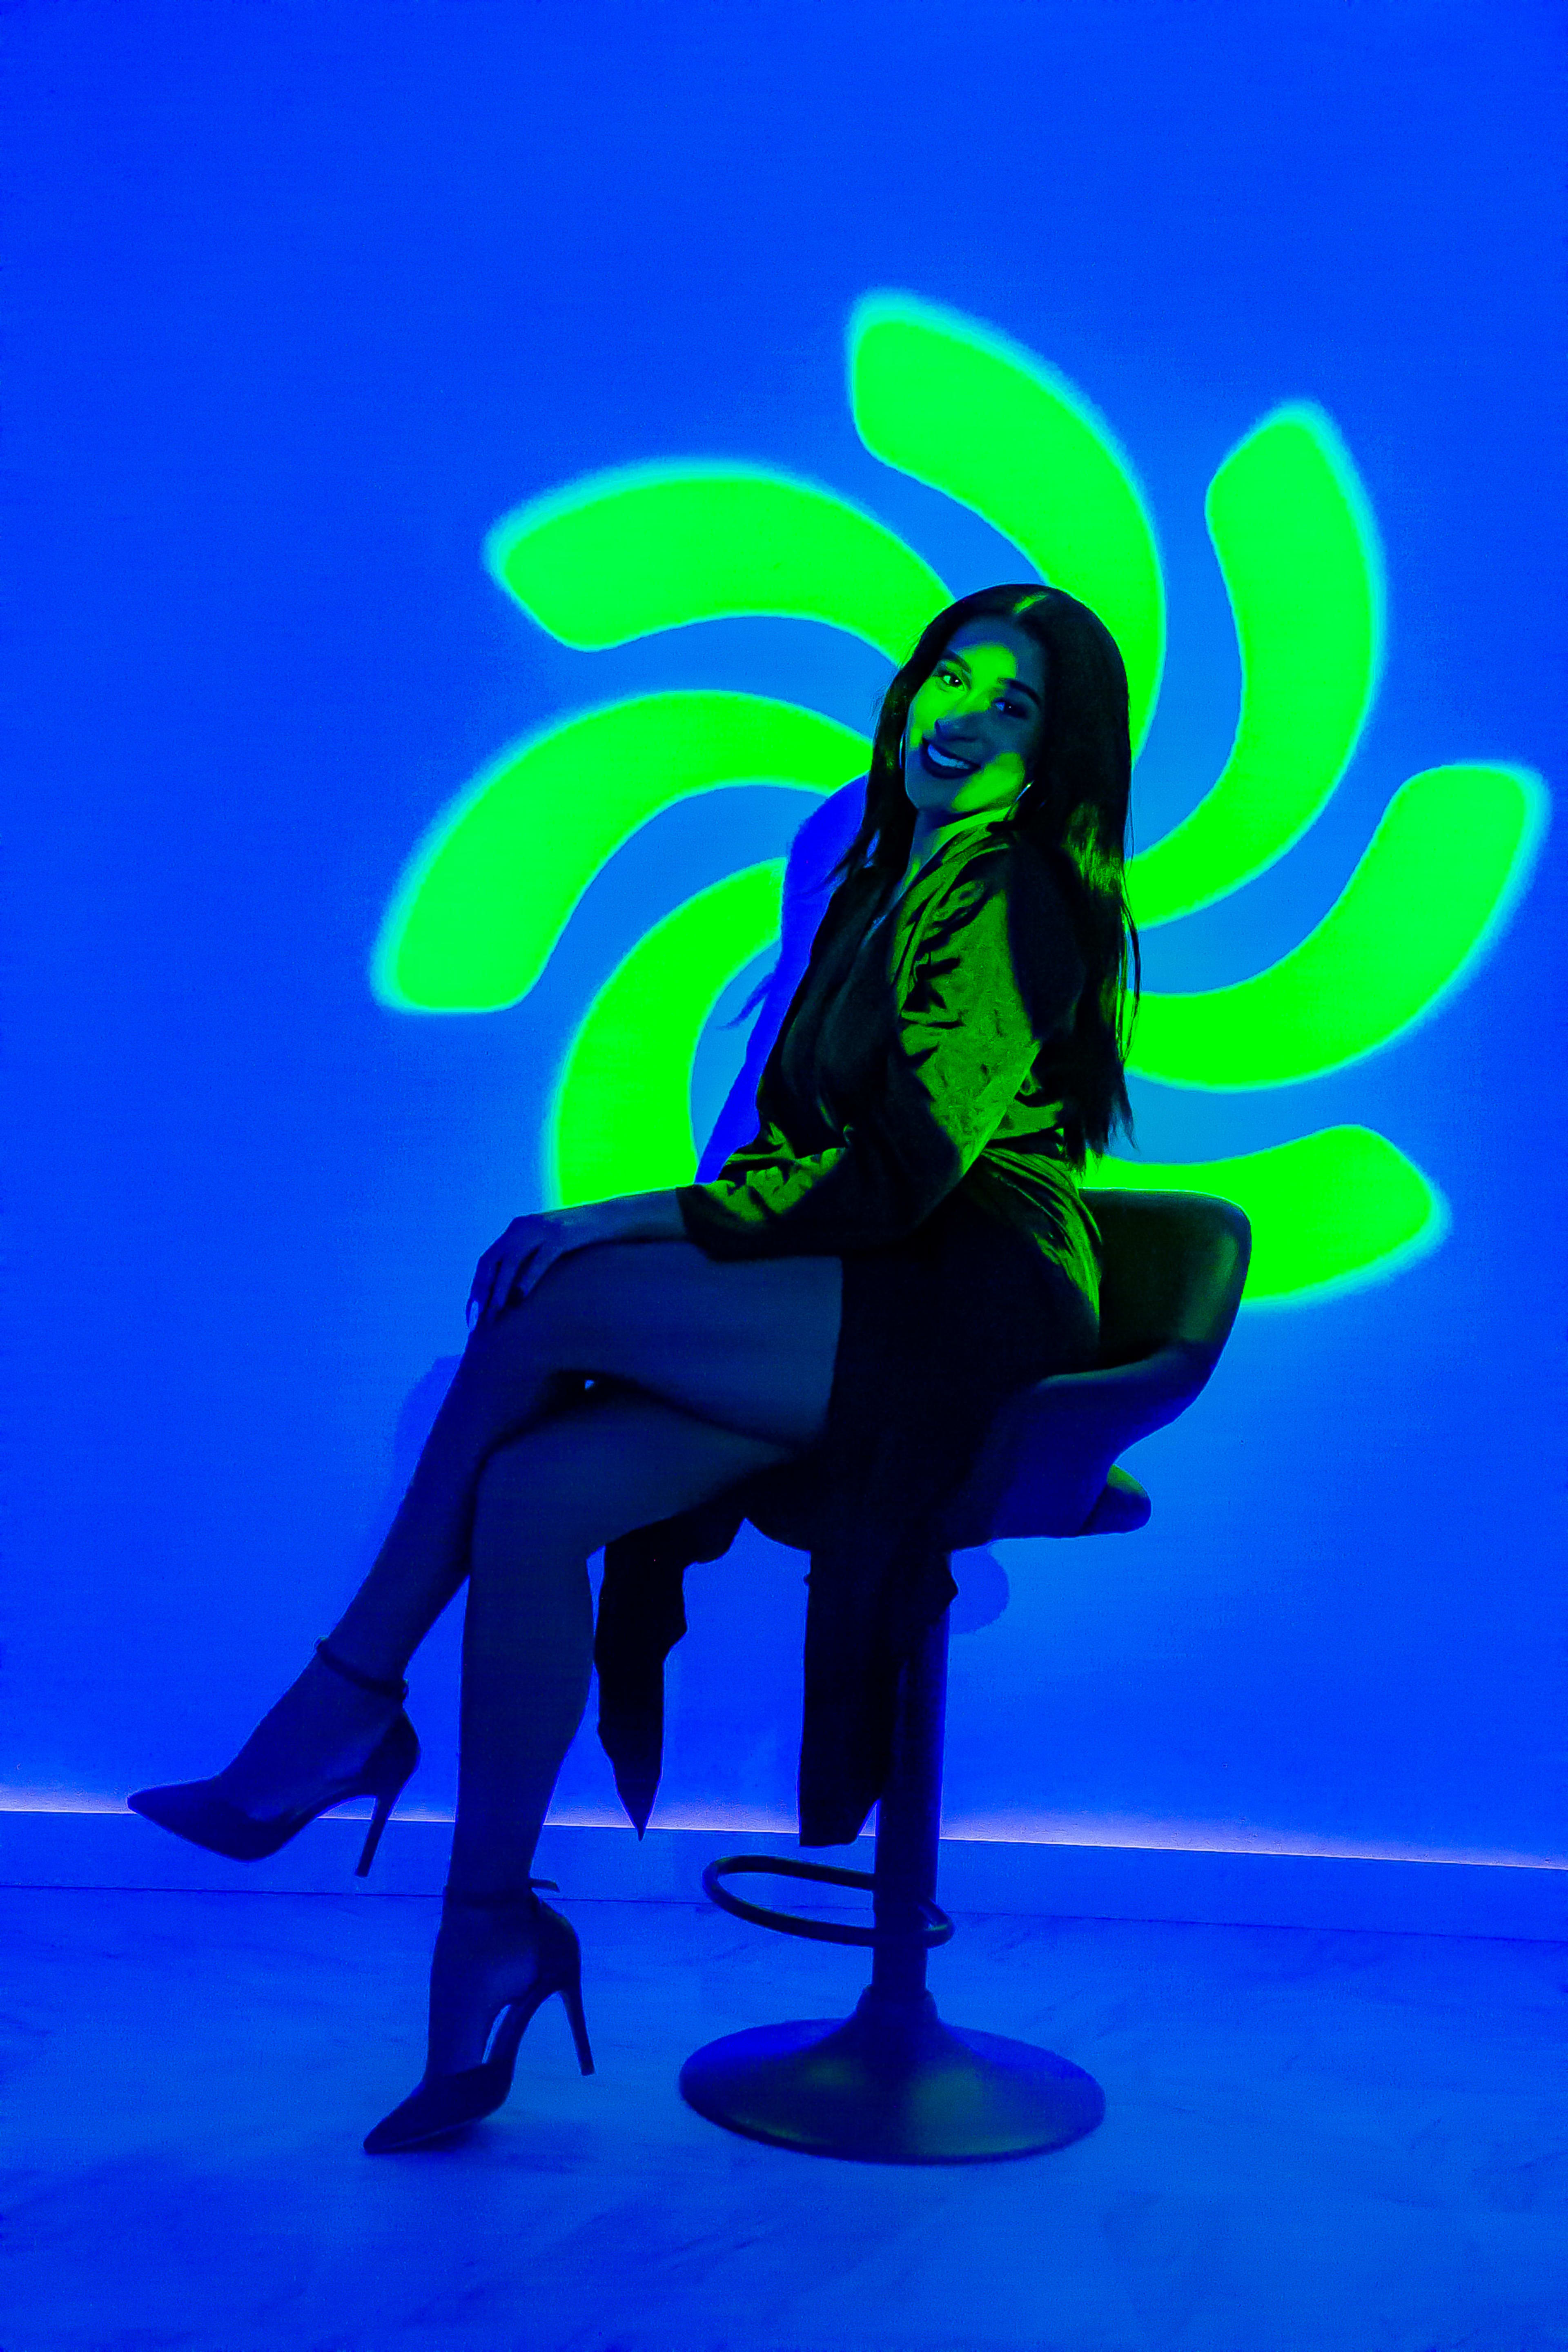 A fashion photoshoot of a woman on a chair in front of a neon blue wall.